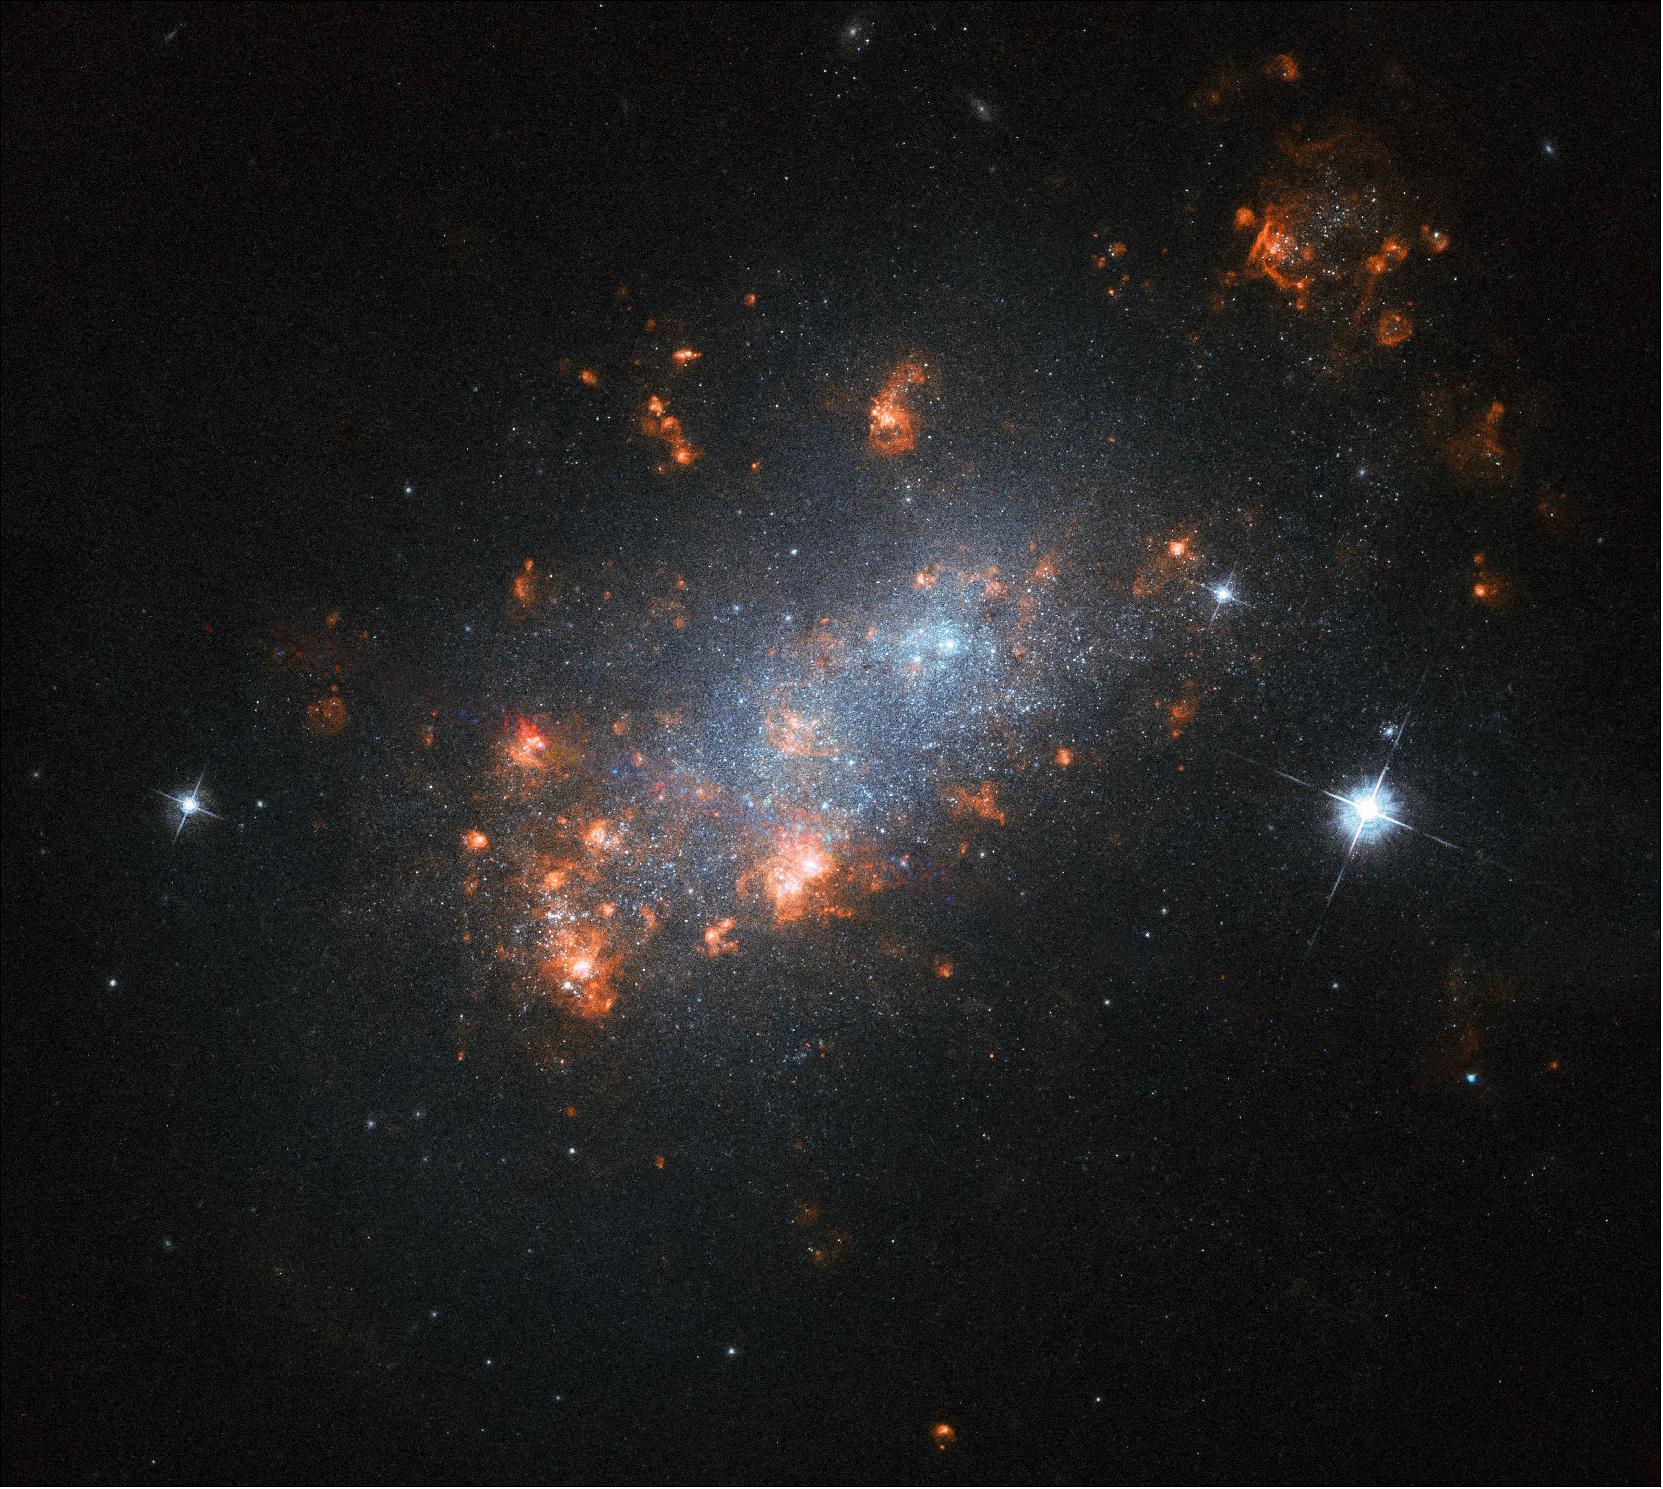 Figure 39: The galaxy NGC 1156 resembles a delicate cherry blossom tree flowering in springtime in this Hubble Picture of the Week. The many bright "blooms" within the galaxy are in fact stellar nurseries — regions where new stars are springing to life. Energetic light emitted by newborn stars in these regions streams outwards and encounters nearby pockets of hydrogen gas, causing it to glow with a characteristic pink hue (image credit: ESA/Hubble, NASA, R. Jansen; CC BY 4.0)